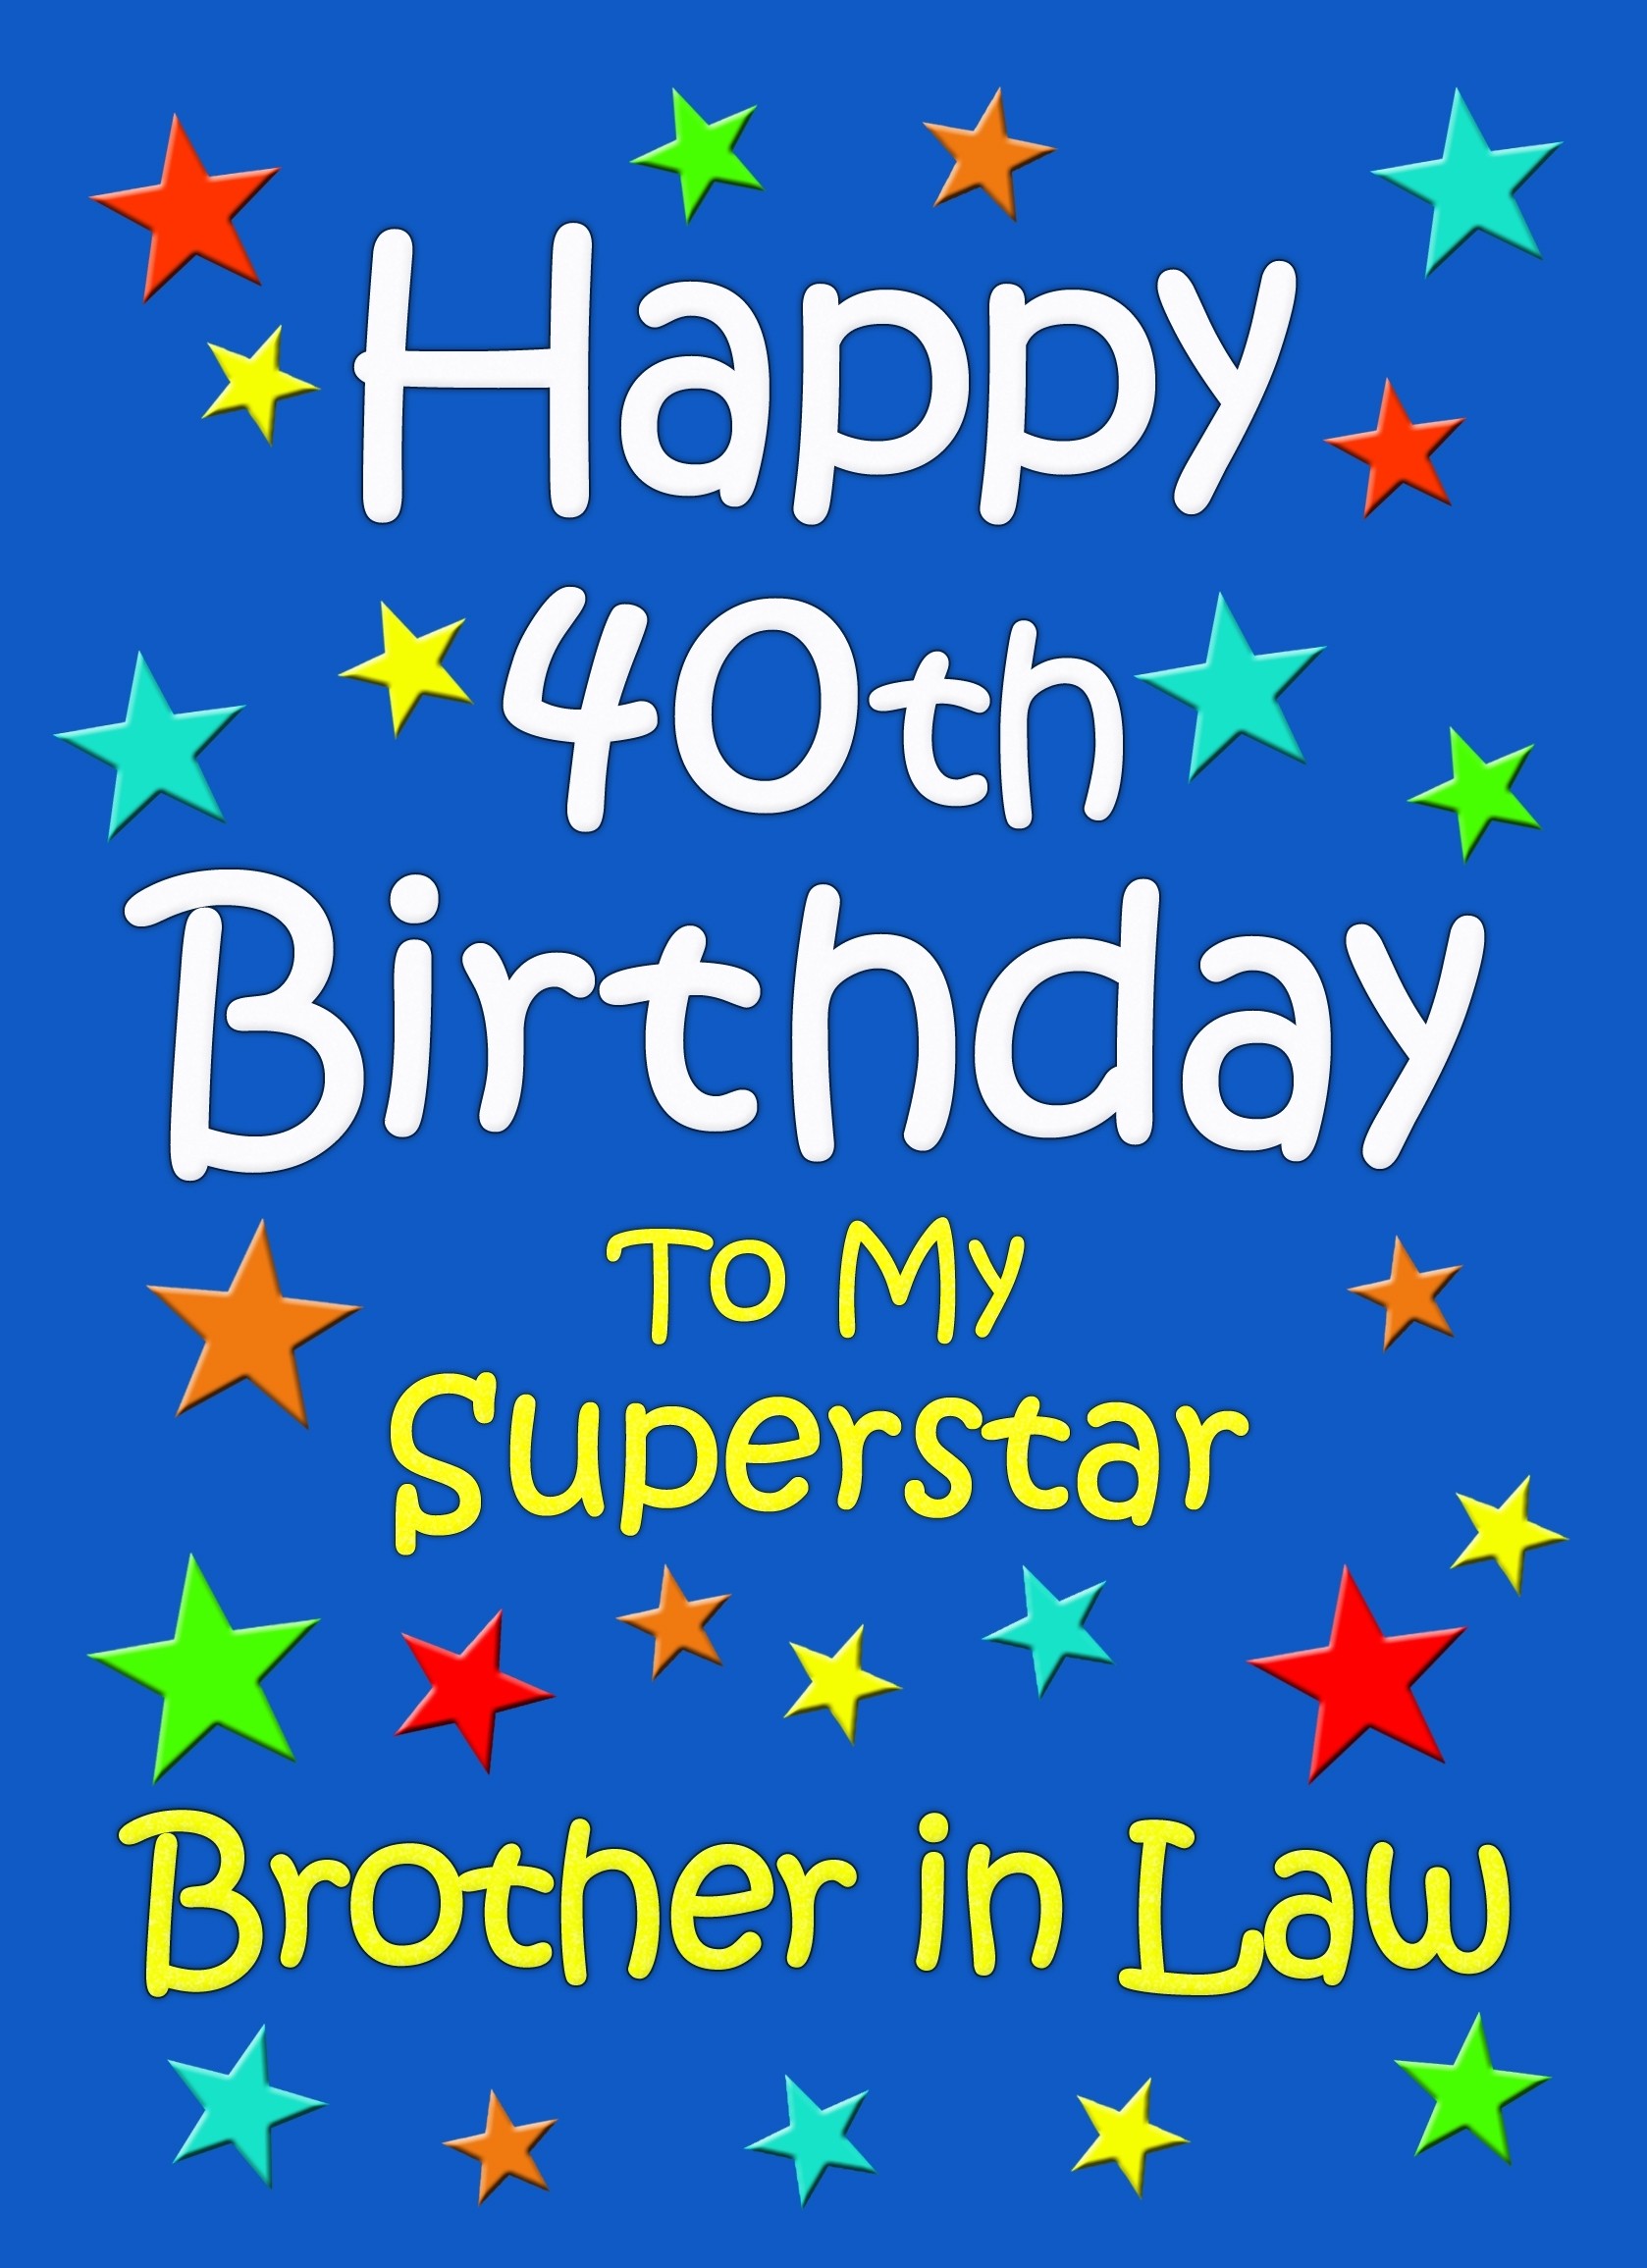 Brother in Law 40th Birthday Card (Blue)